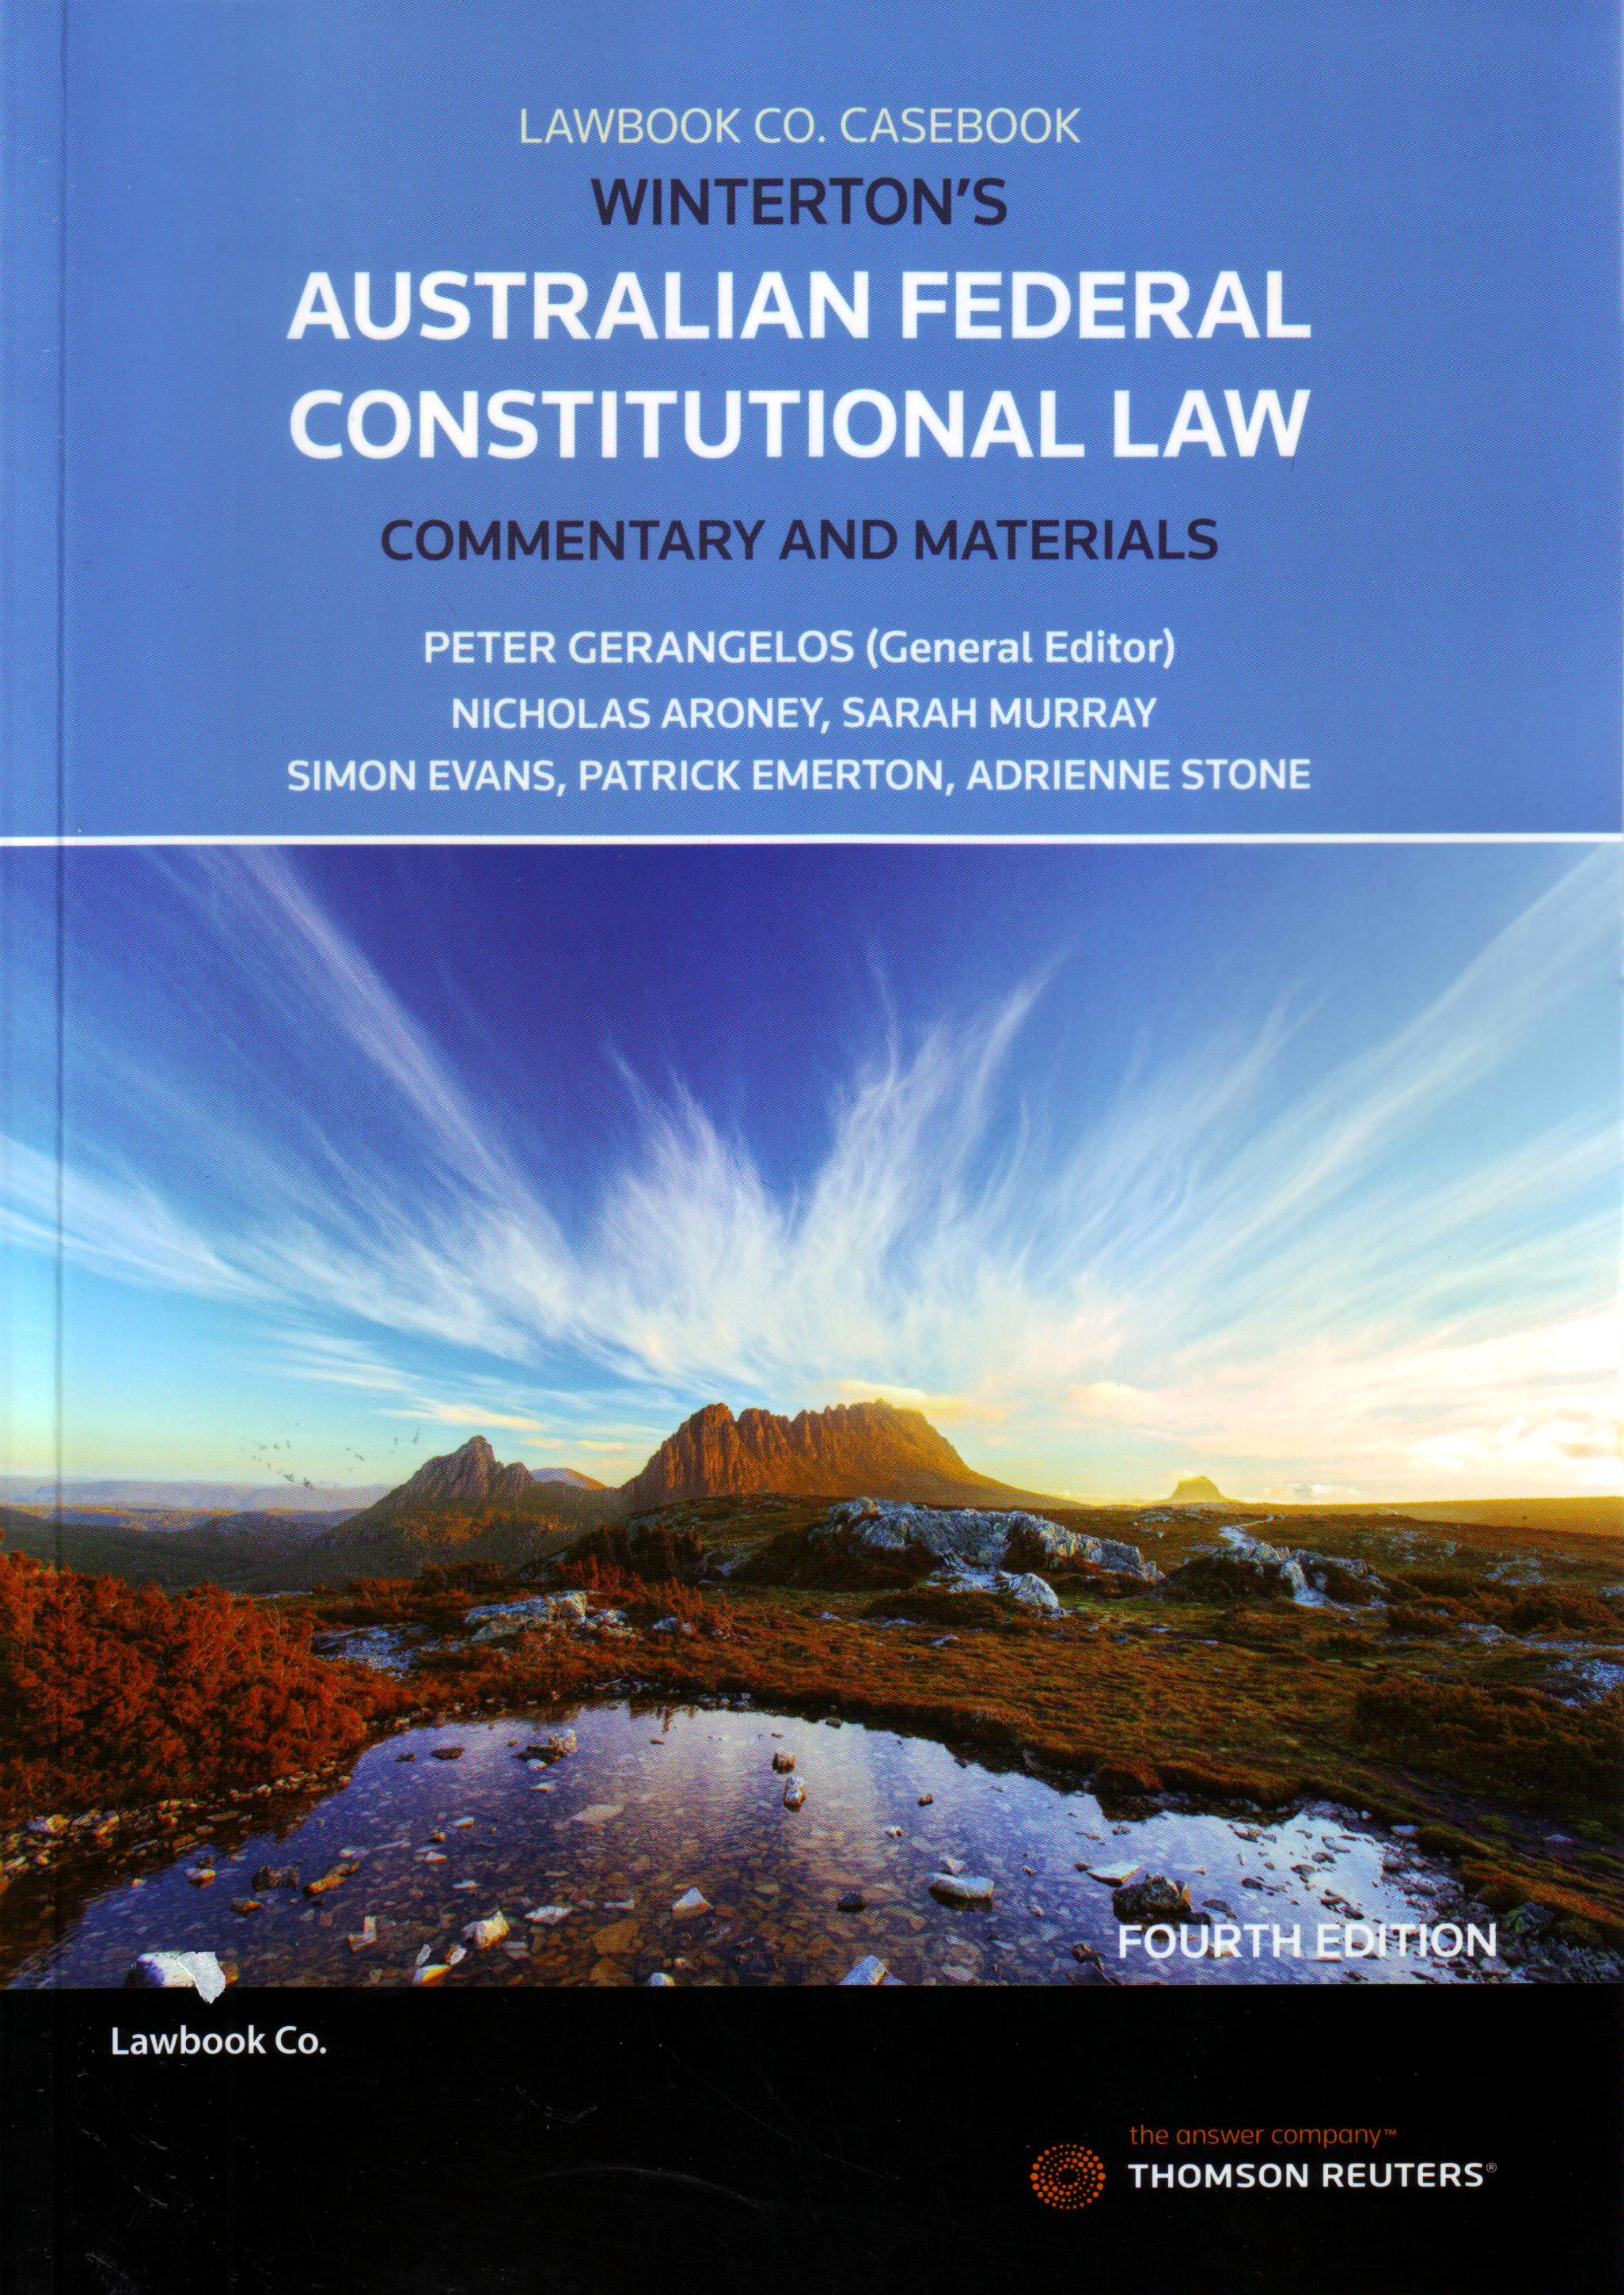 Winterton's Australian Federal Constitutional Law Commentary